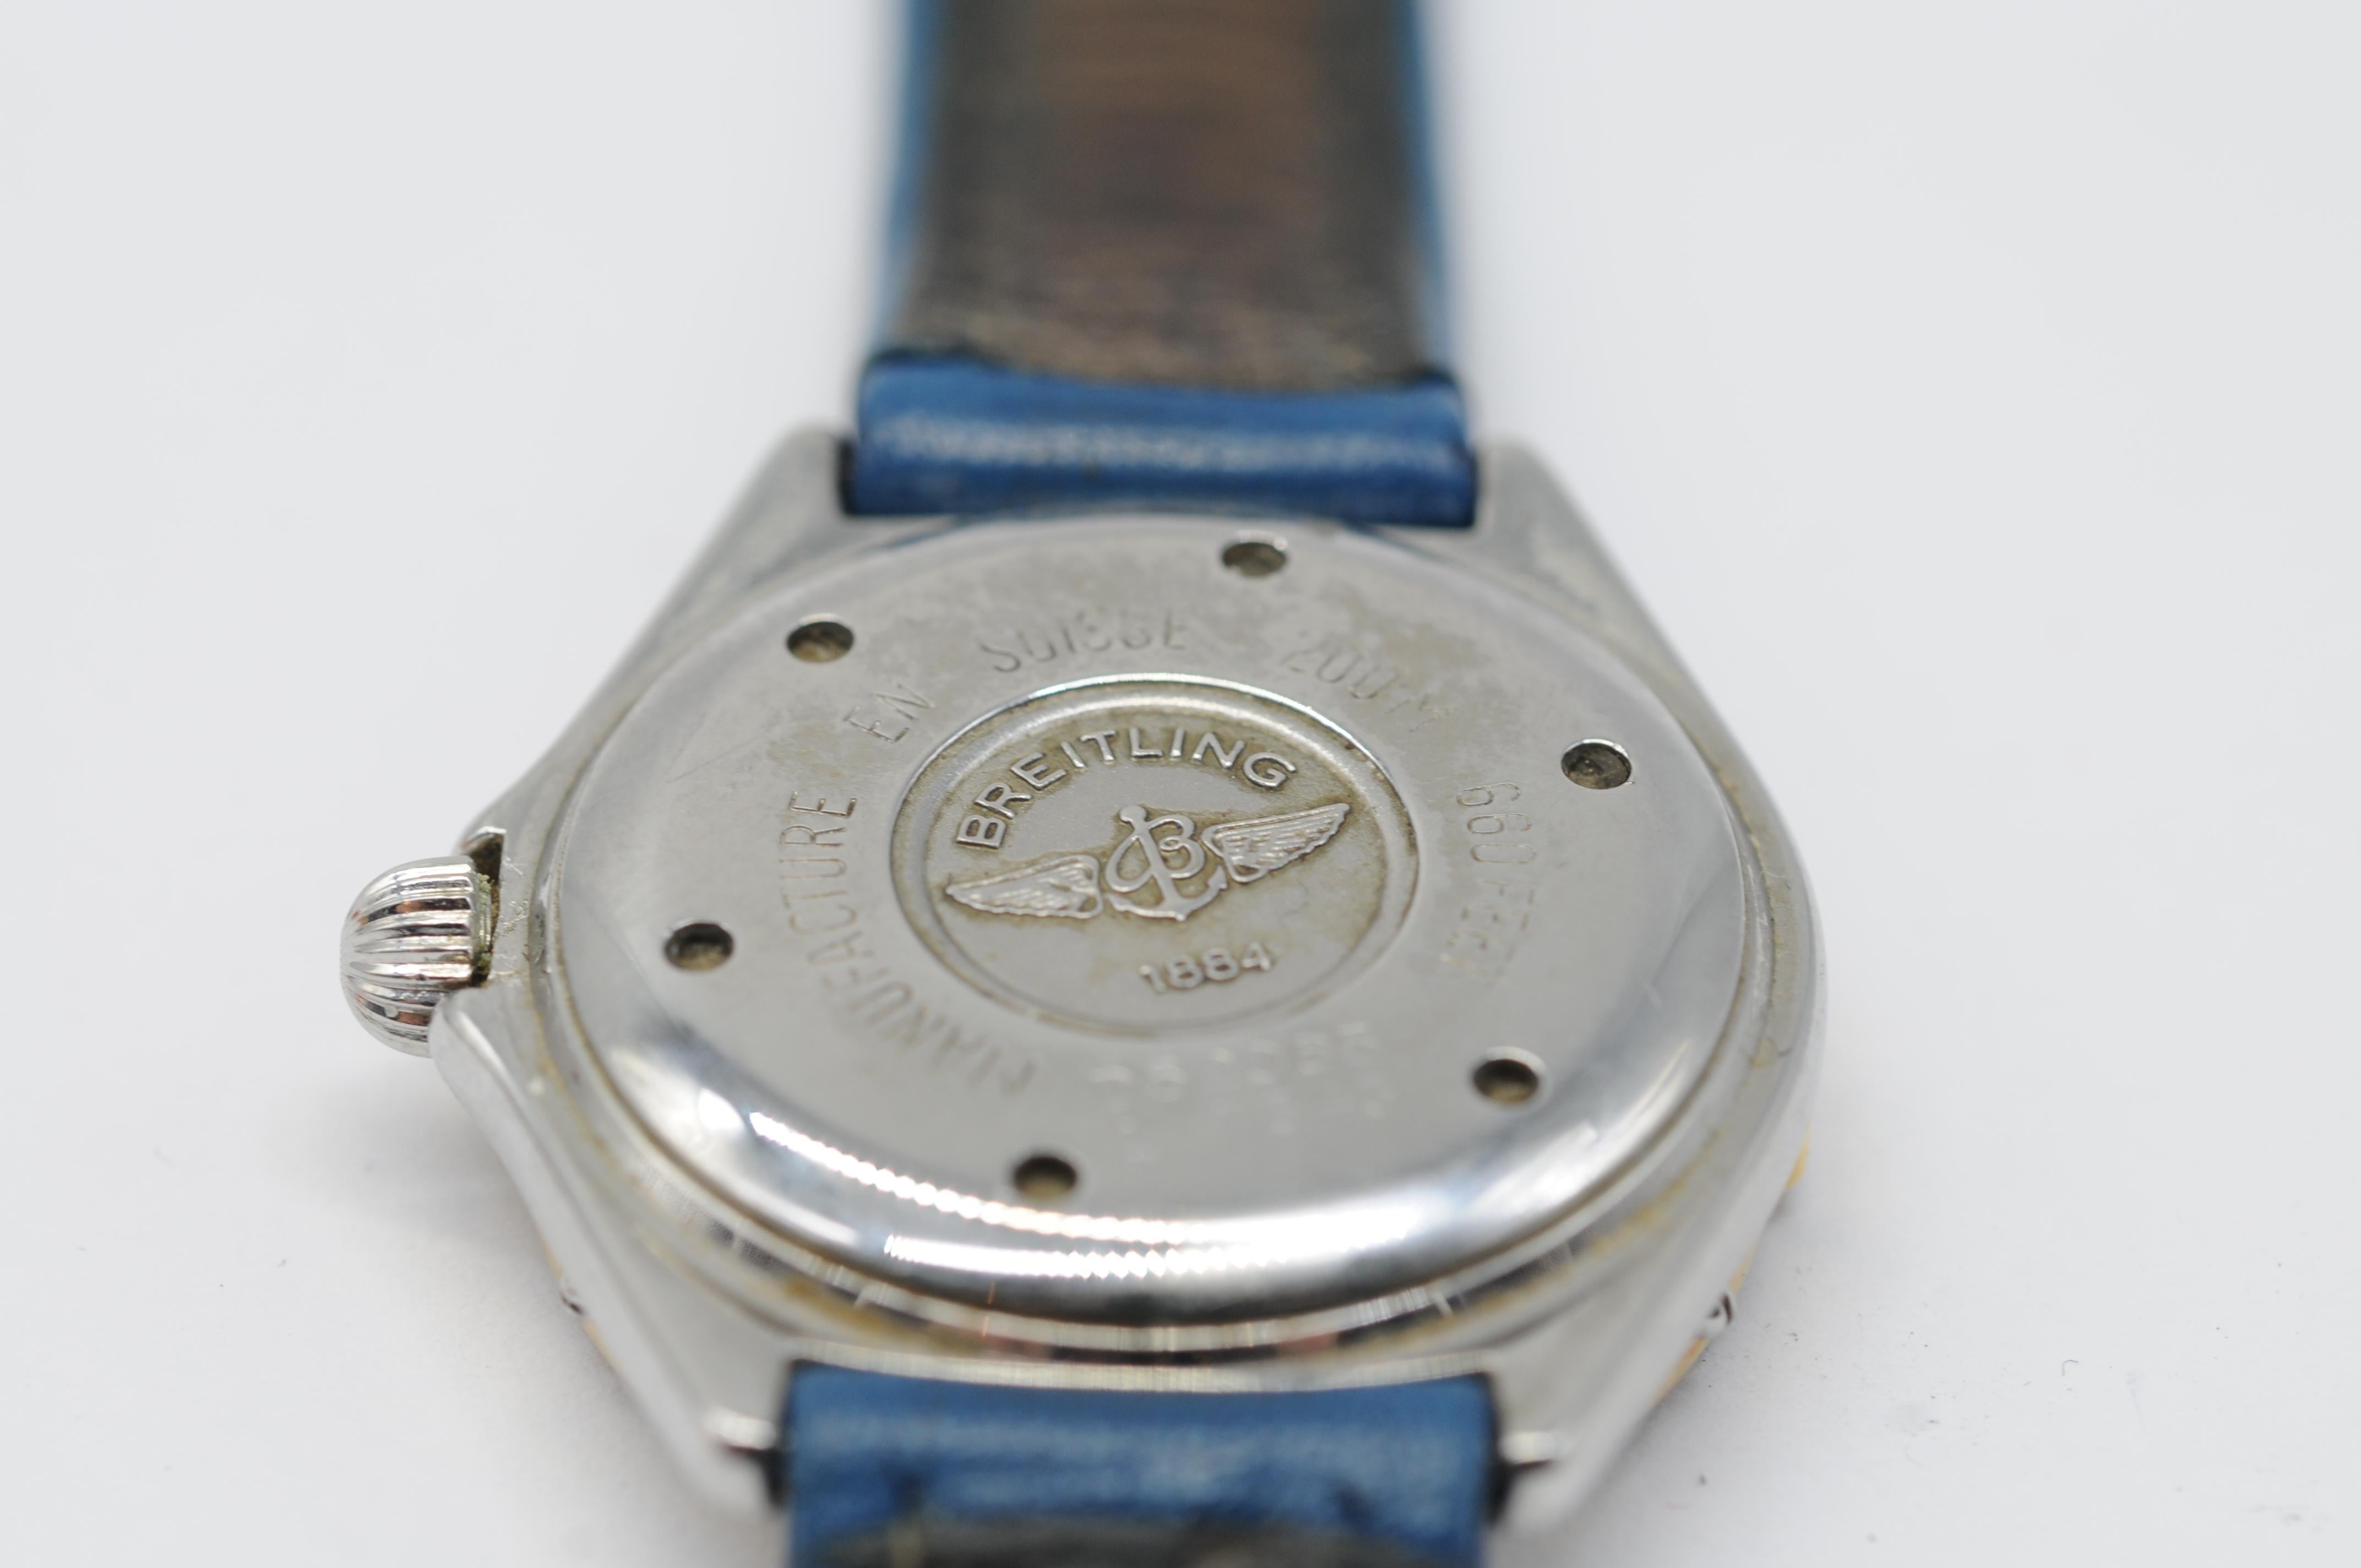 Breitling Lady J D52065 with a deep blue leather strap For Sale 12